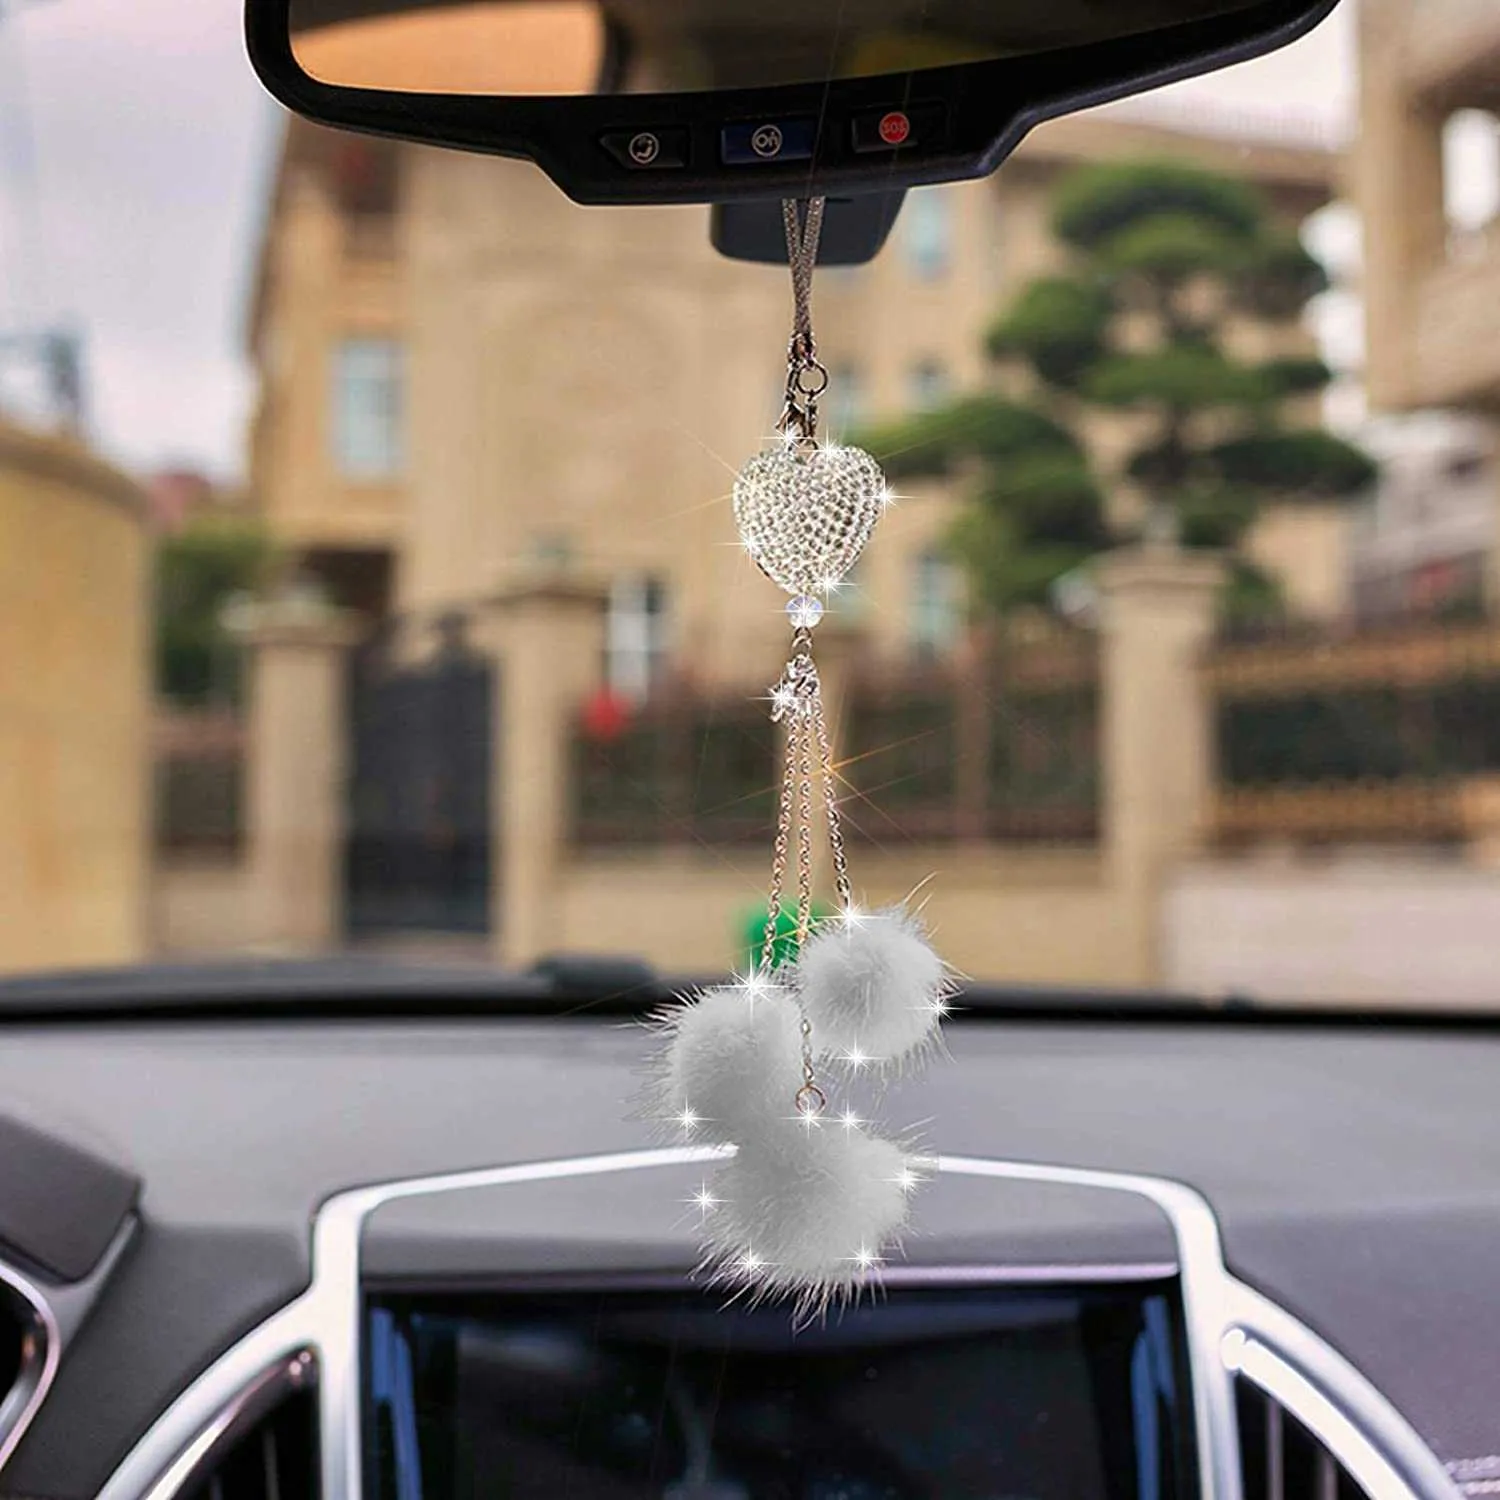  Car Mirror Accessories Cute for Women and Girls, Bling